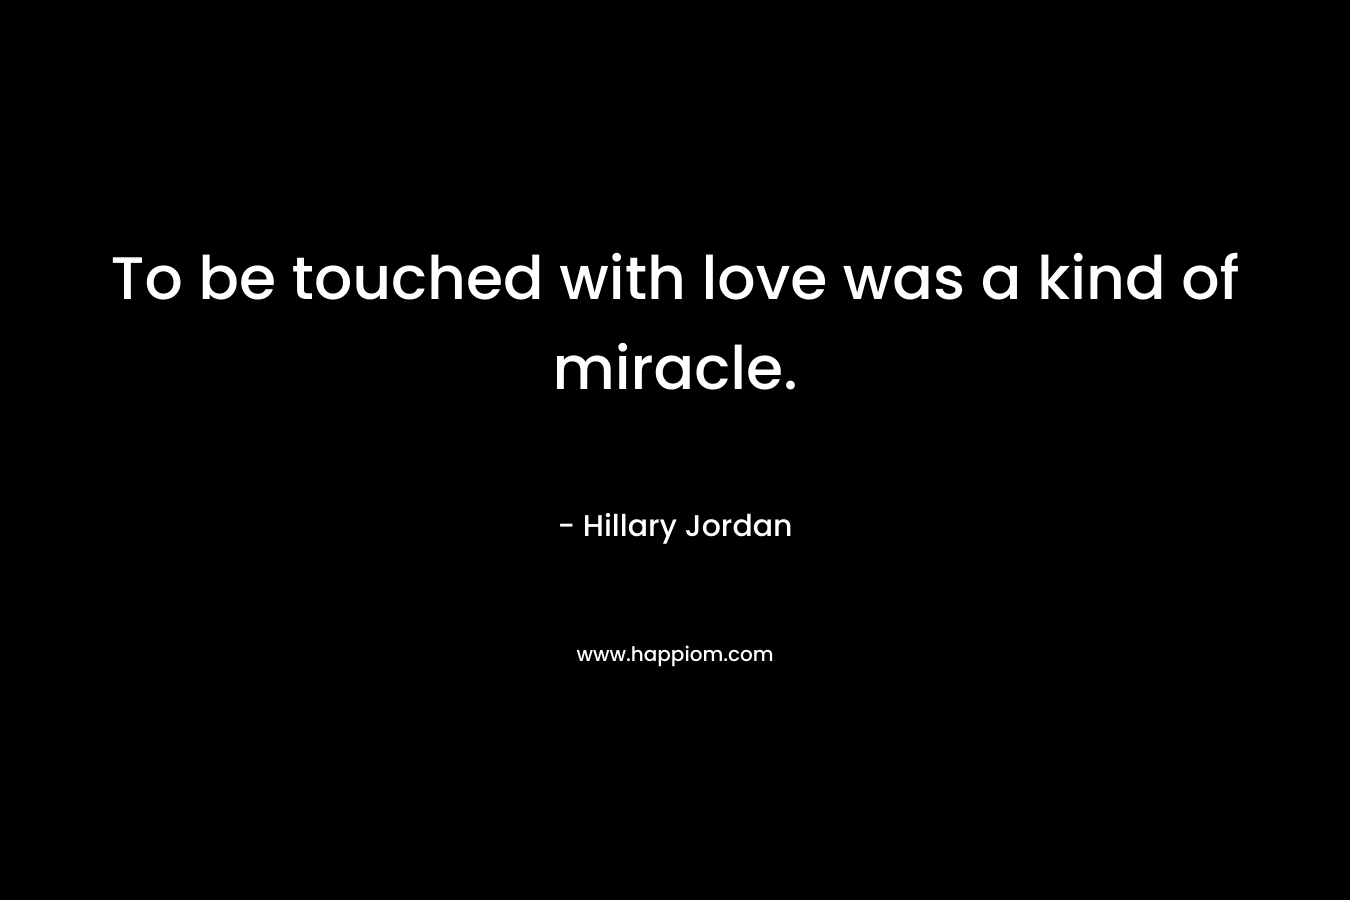 To be touched with love was a kind of miracle.